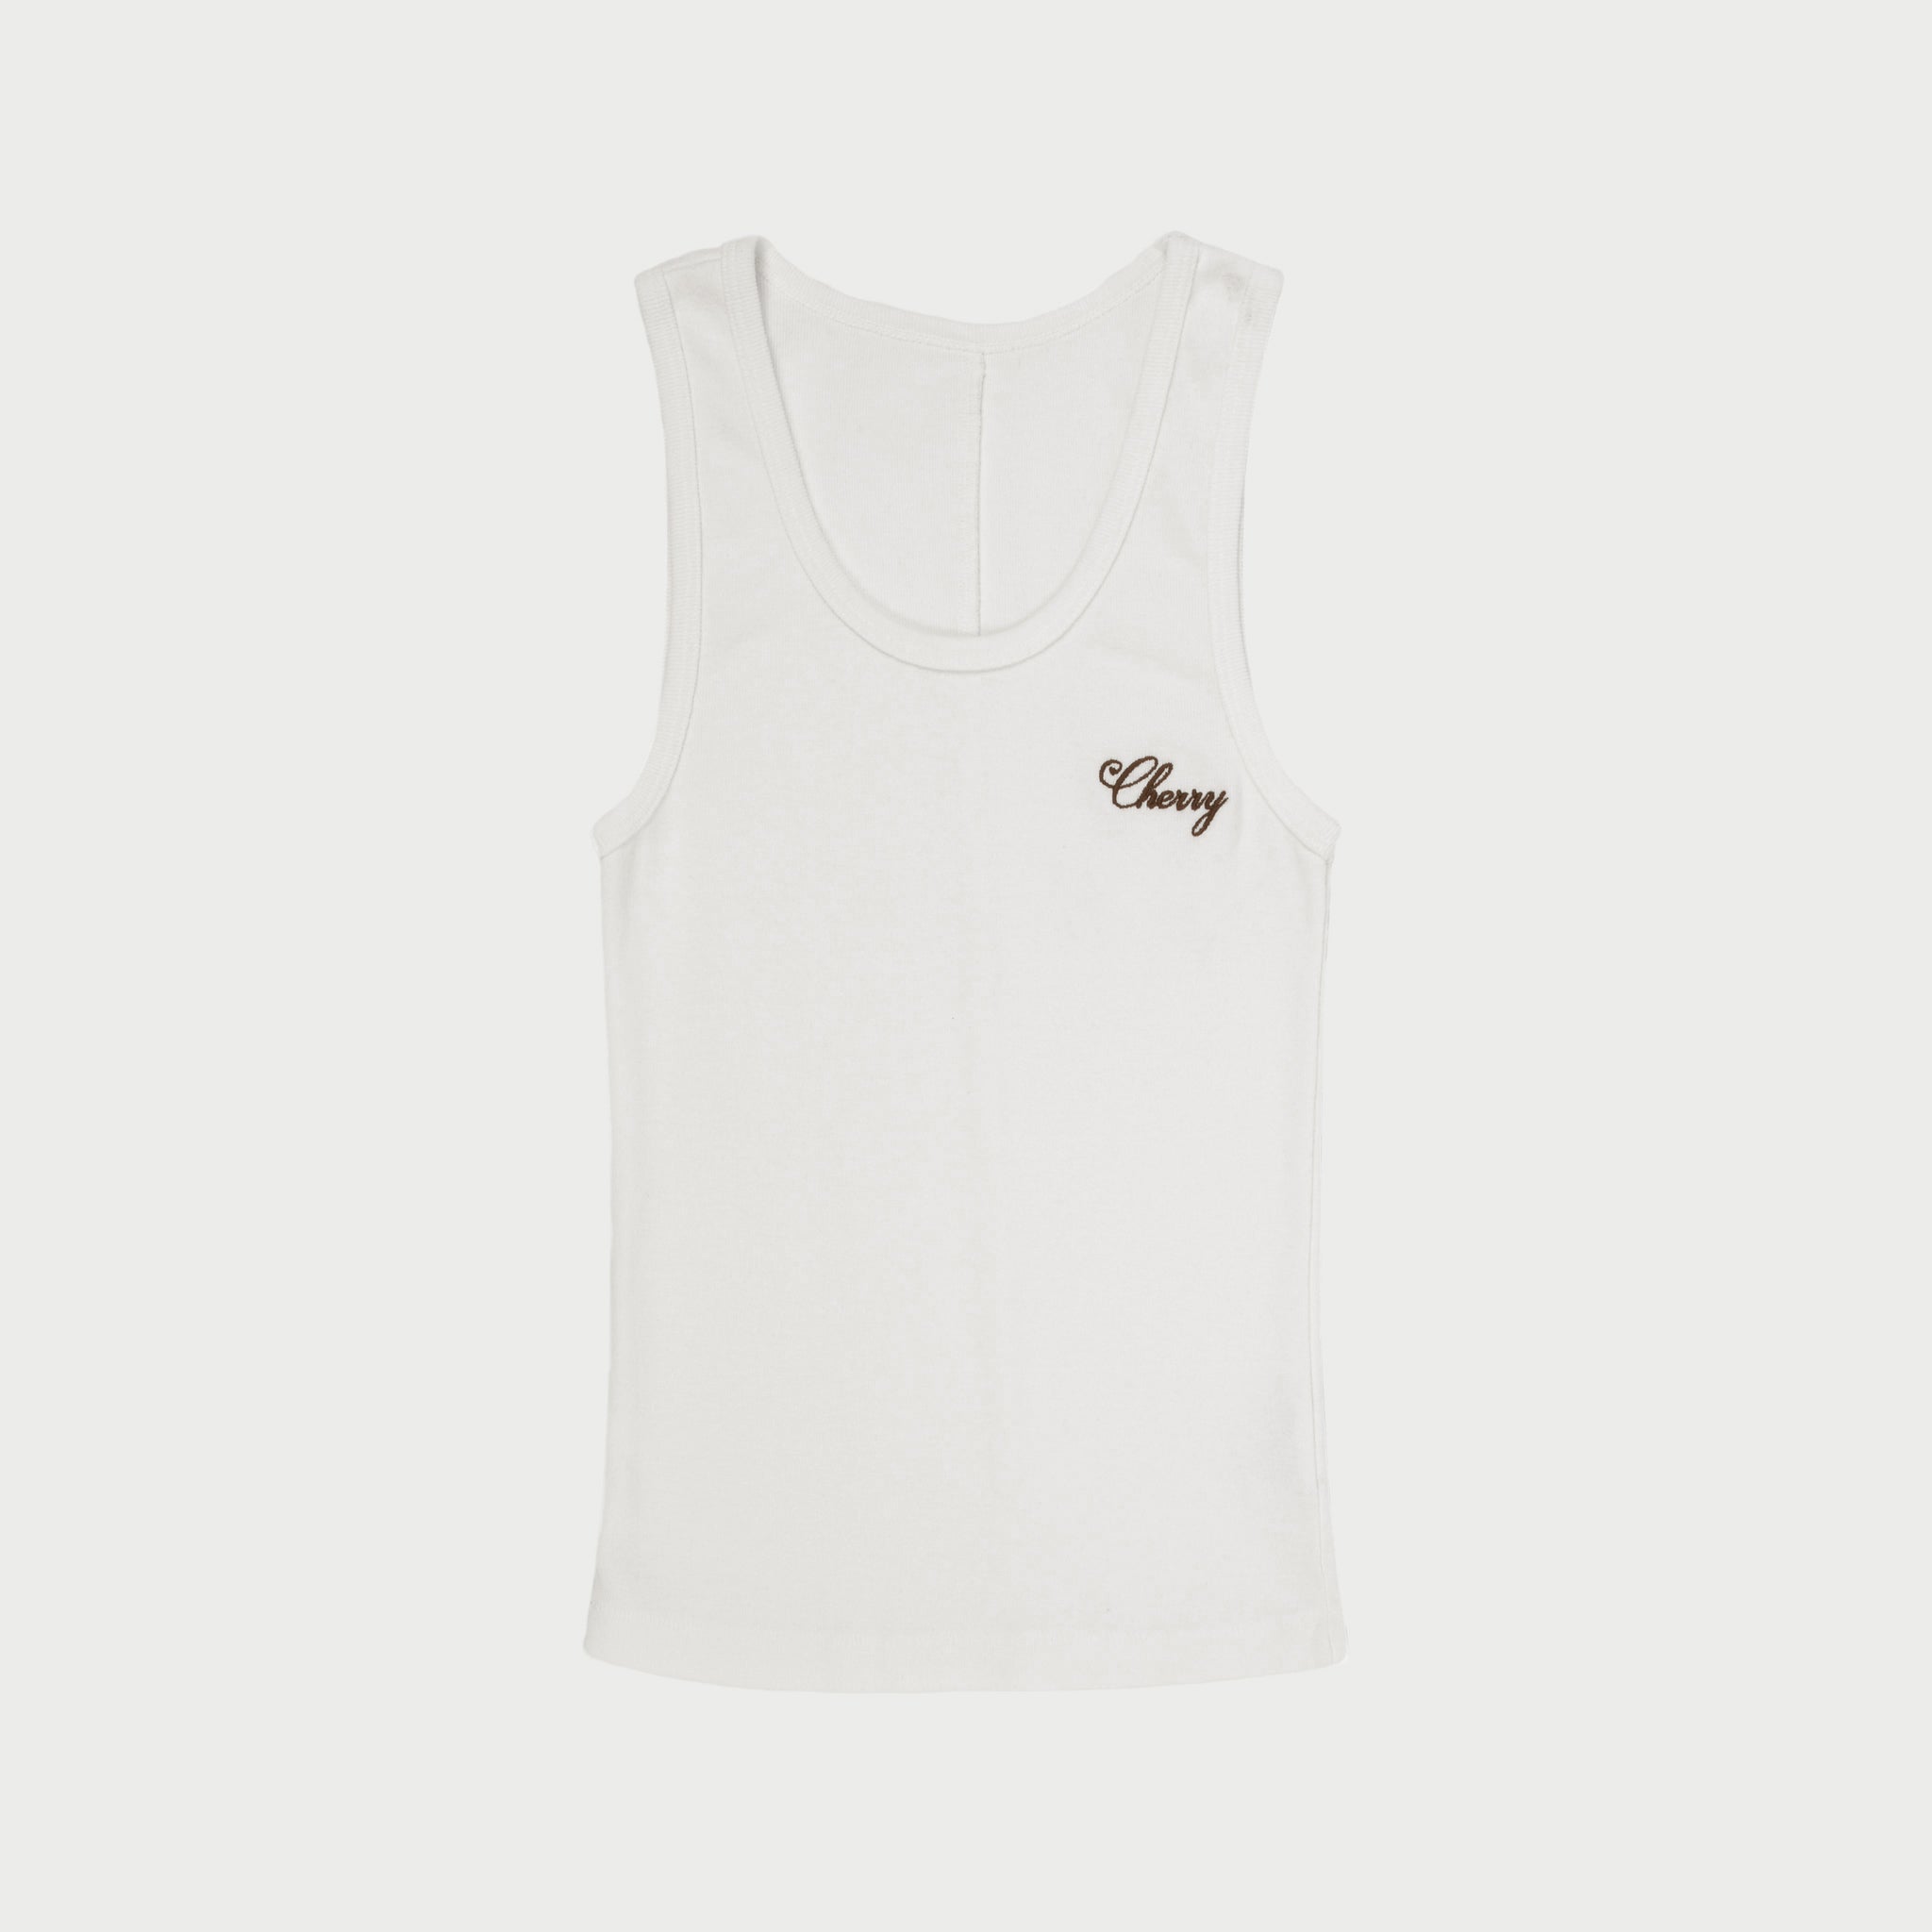 American Classic Tank Top (Vintage White)